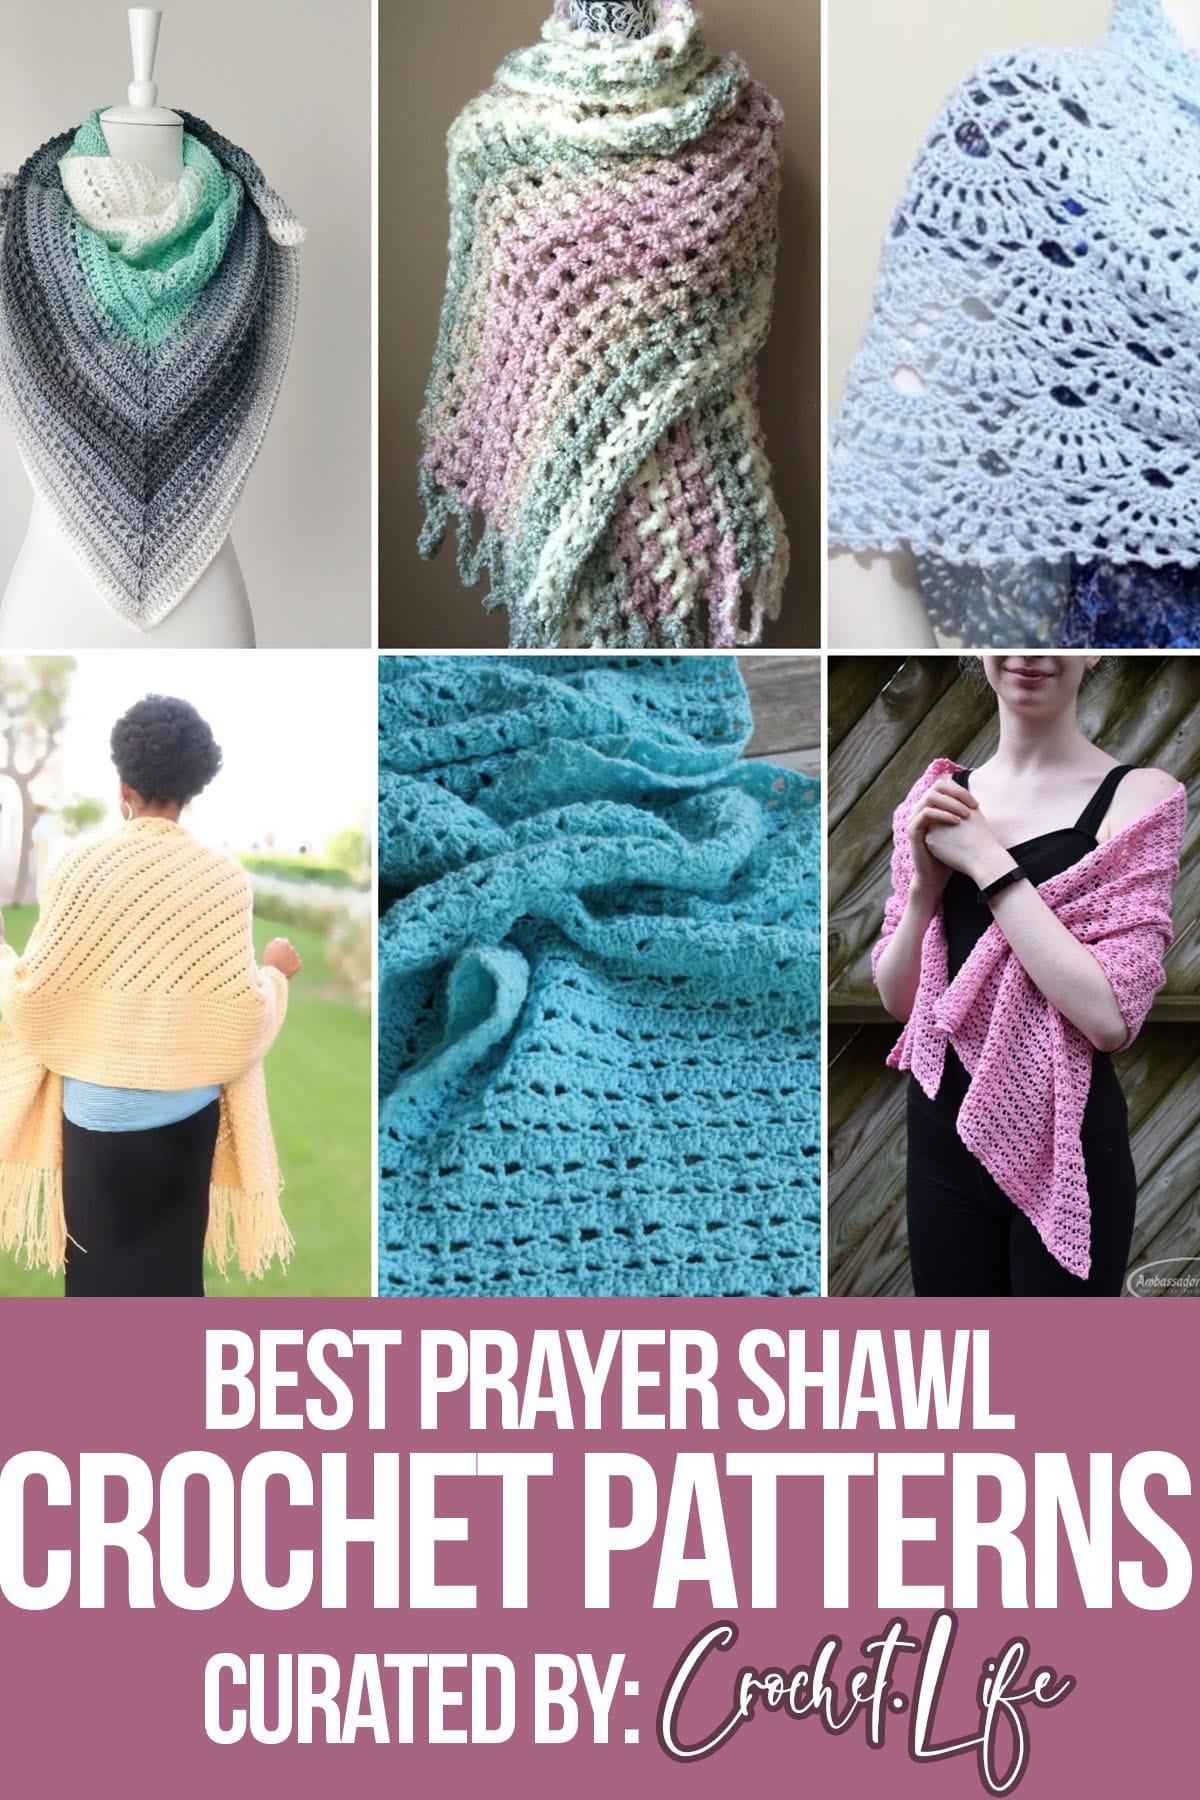 photo collage of crochet patterns of prayer shawl with text which reads best prayer shawl crochet patterns curated by crochet, life